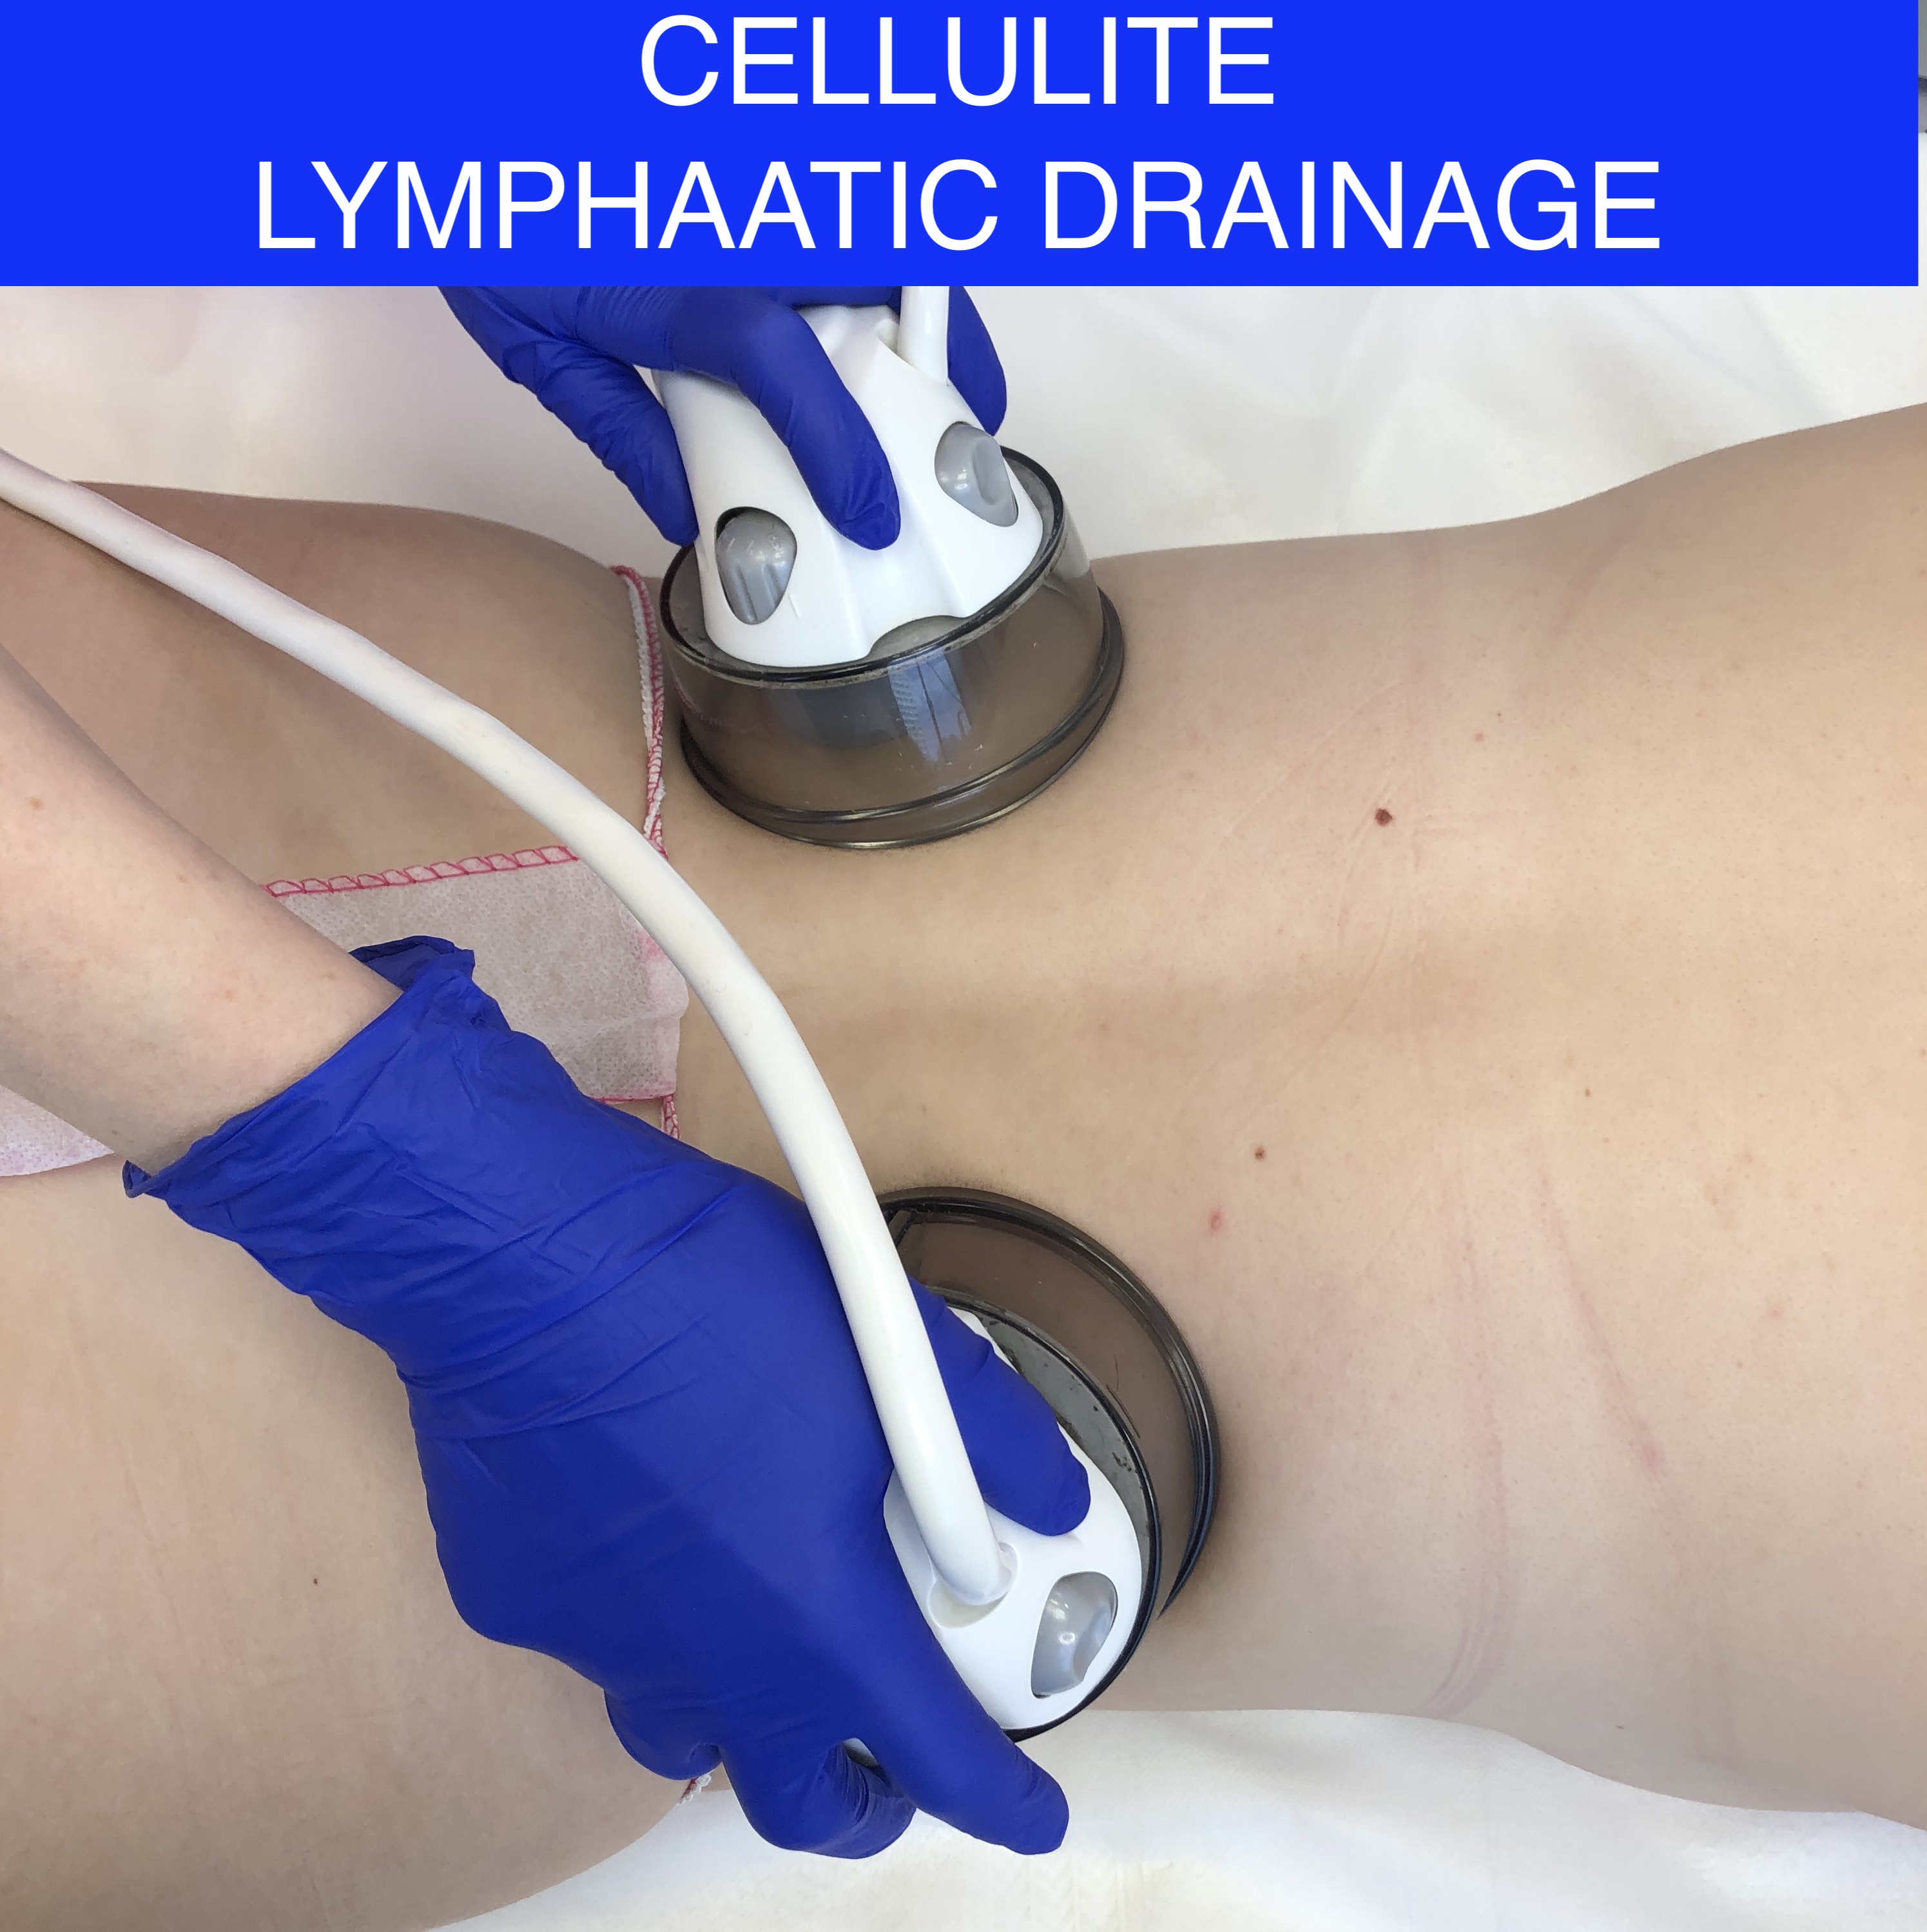 Lymphatic drainage treatment for cellulite